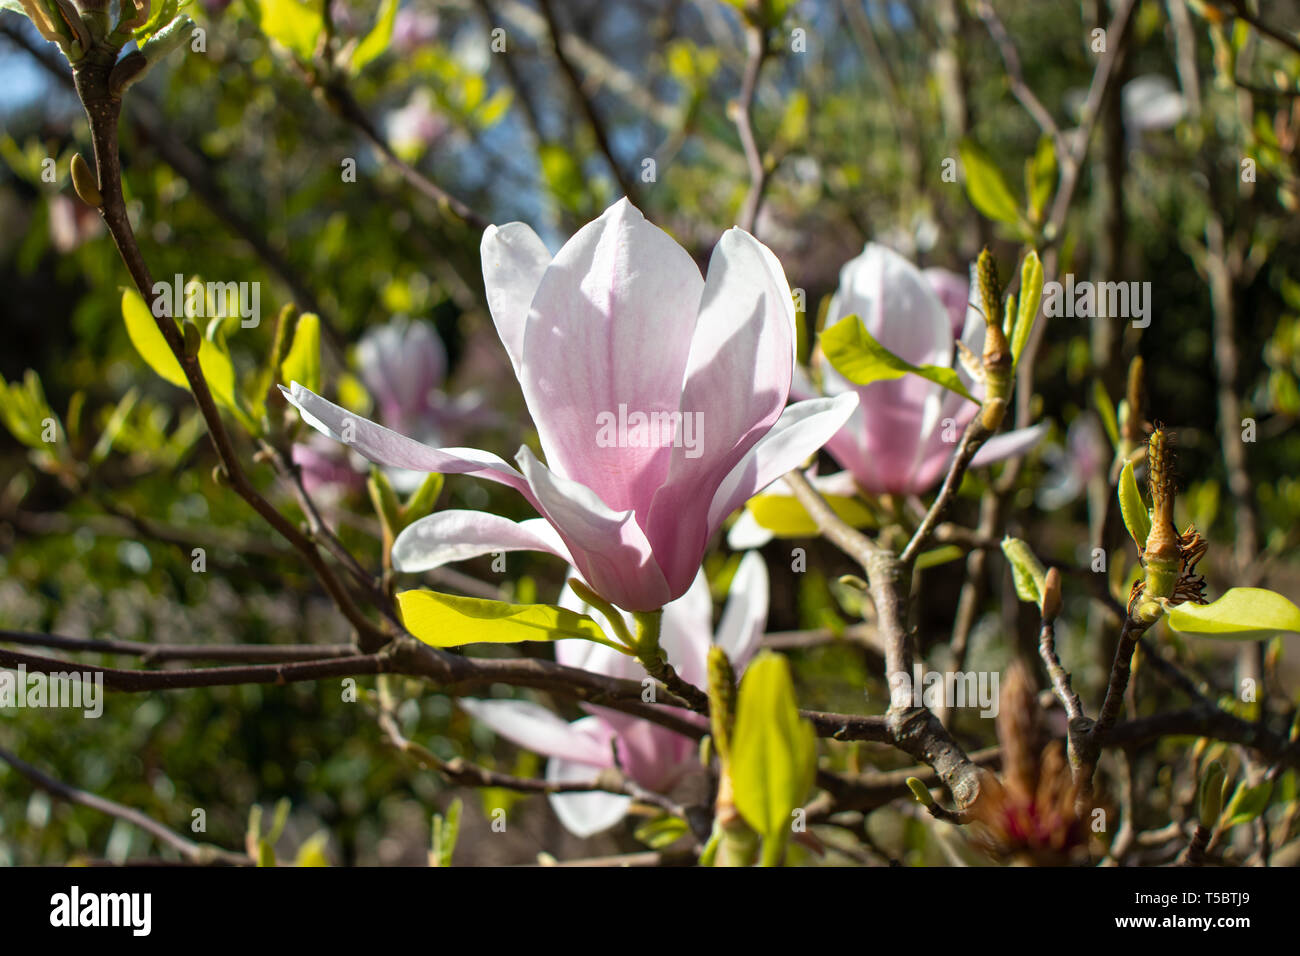 Pink magnolia iliiflora flowers at the blurred sunny garden background Stock Photo